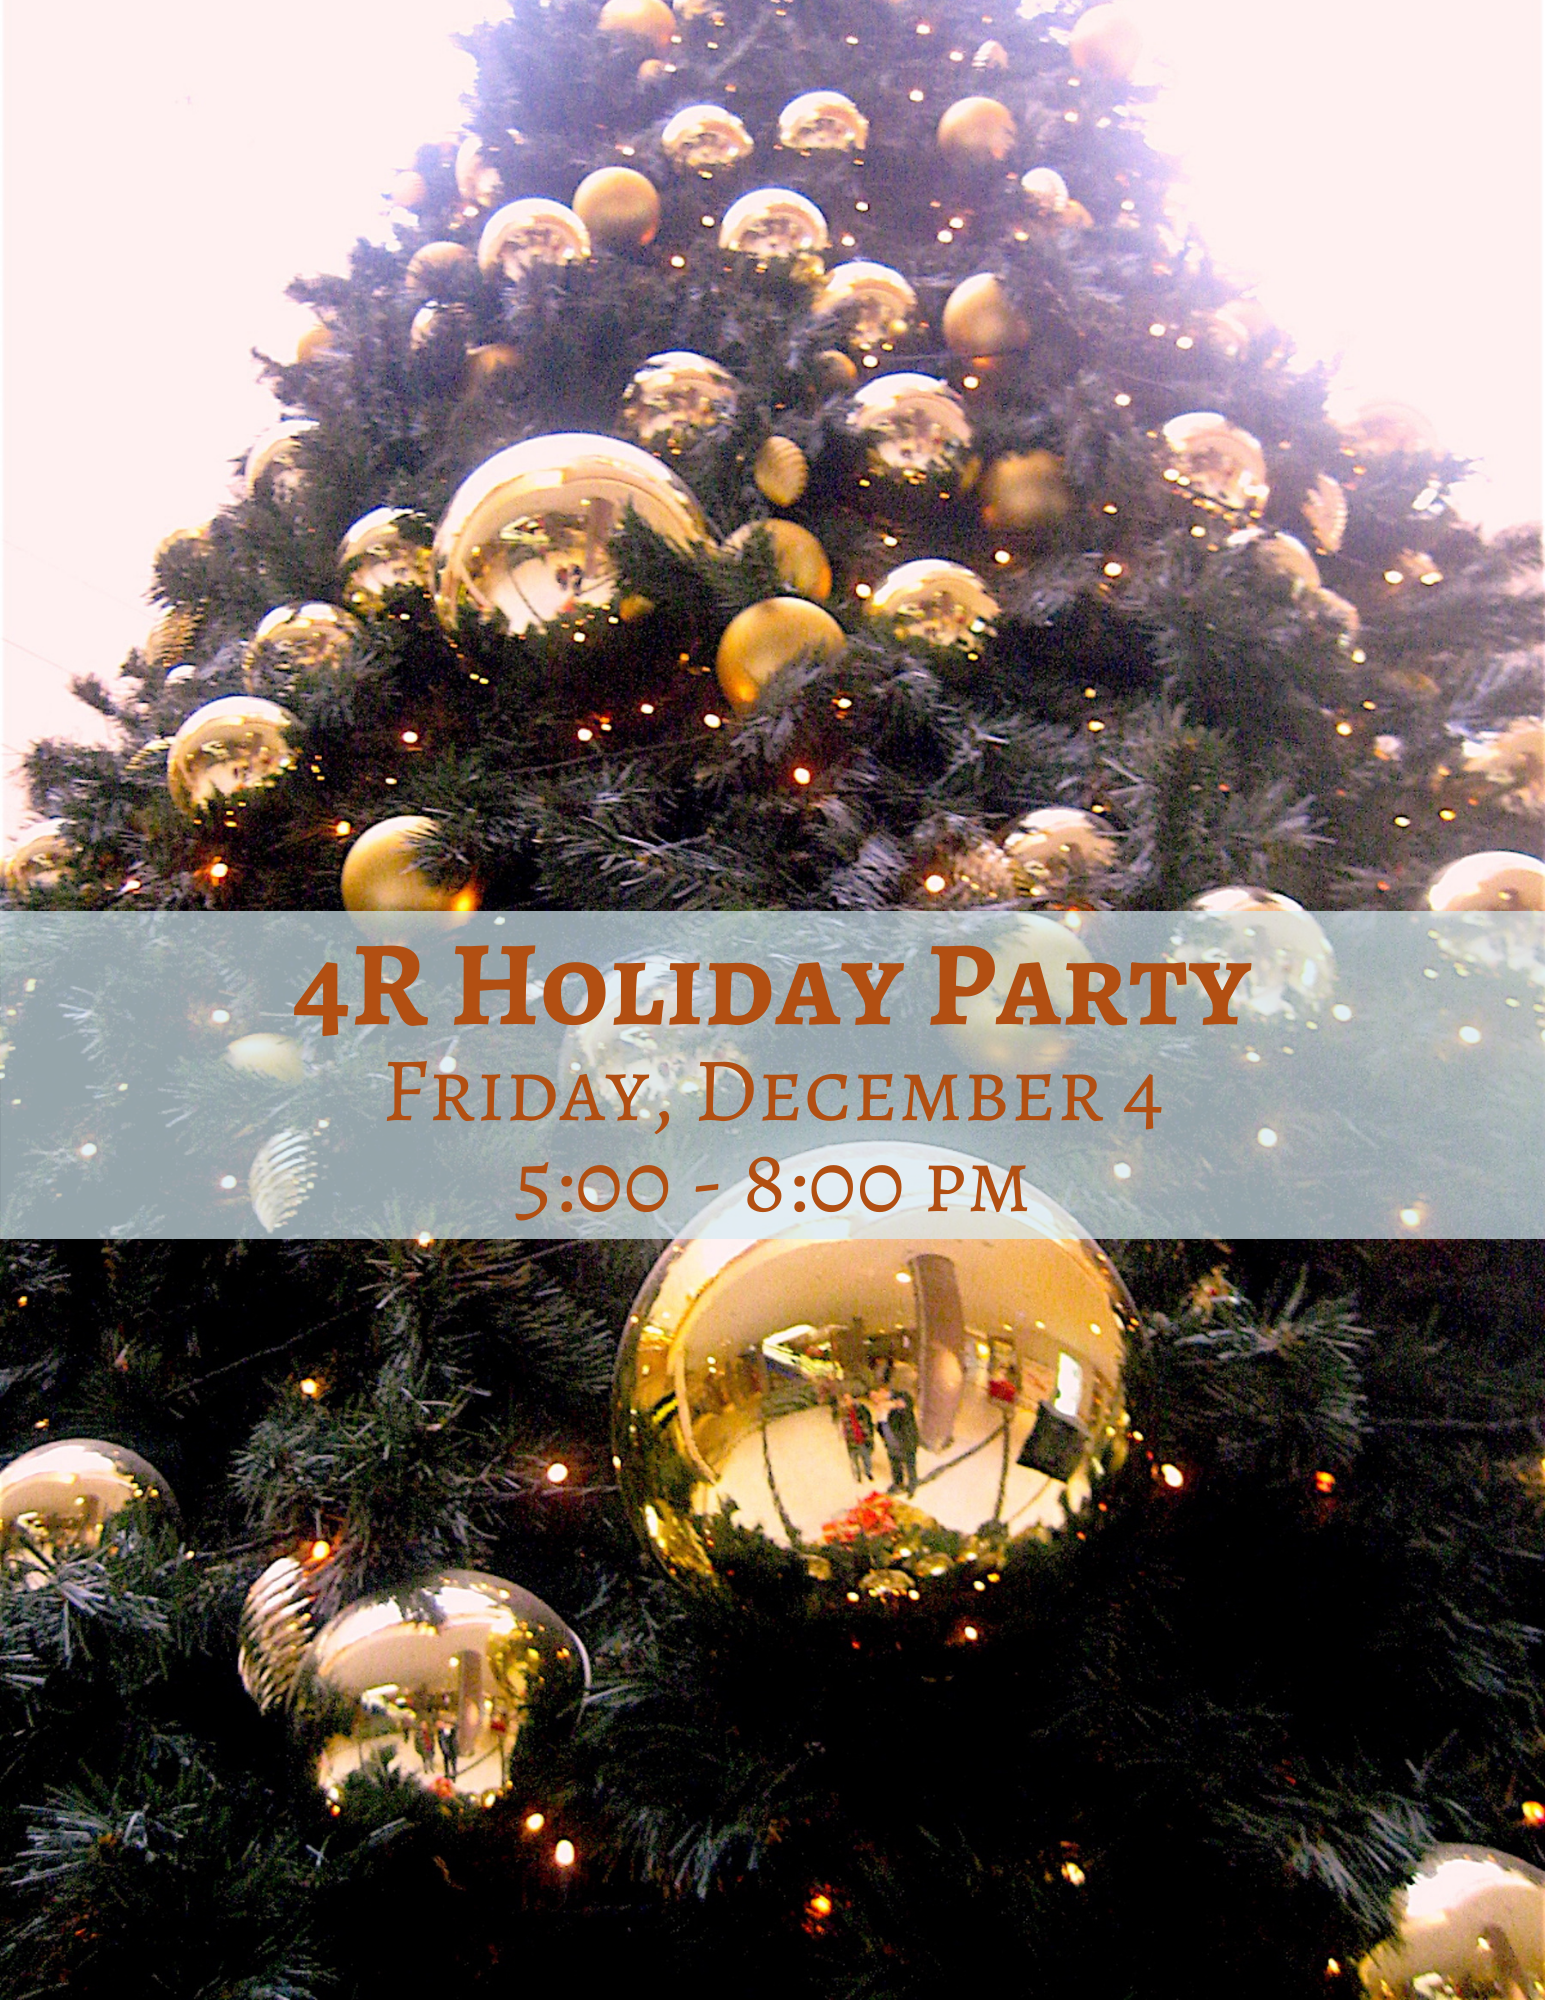 Club 4R Christmas Party - Friday, December 13